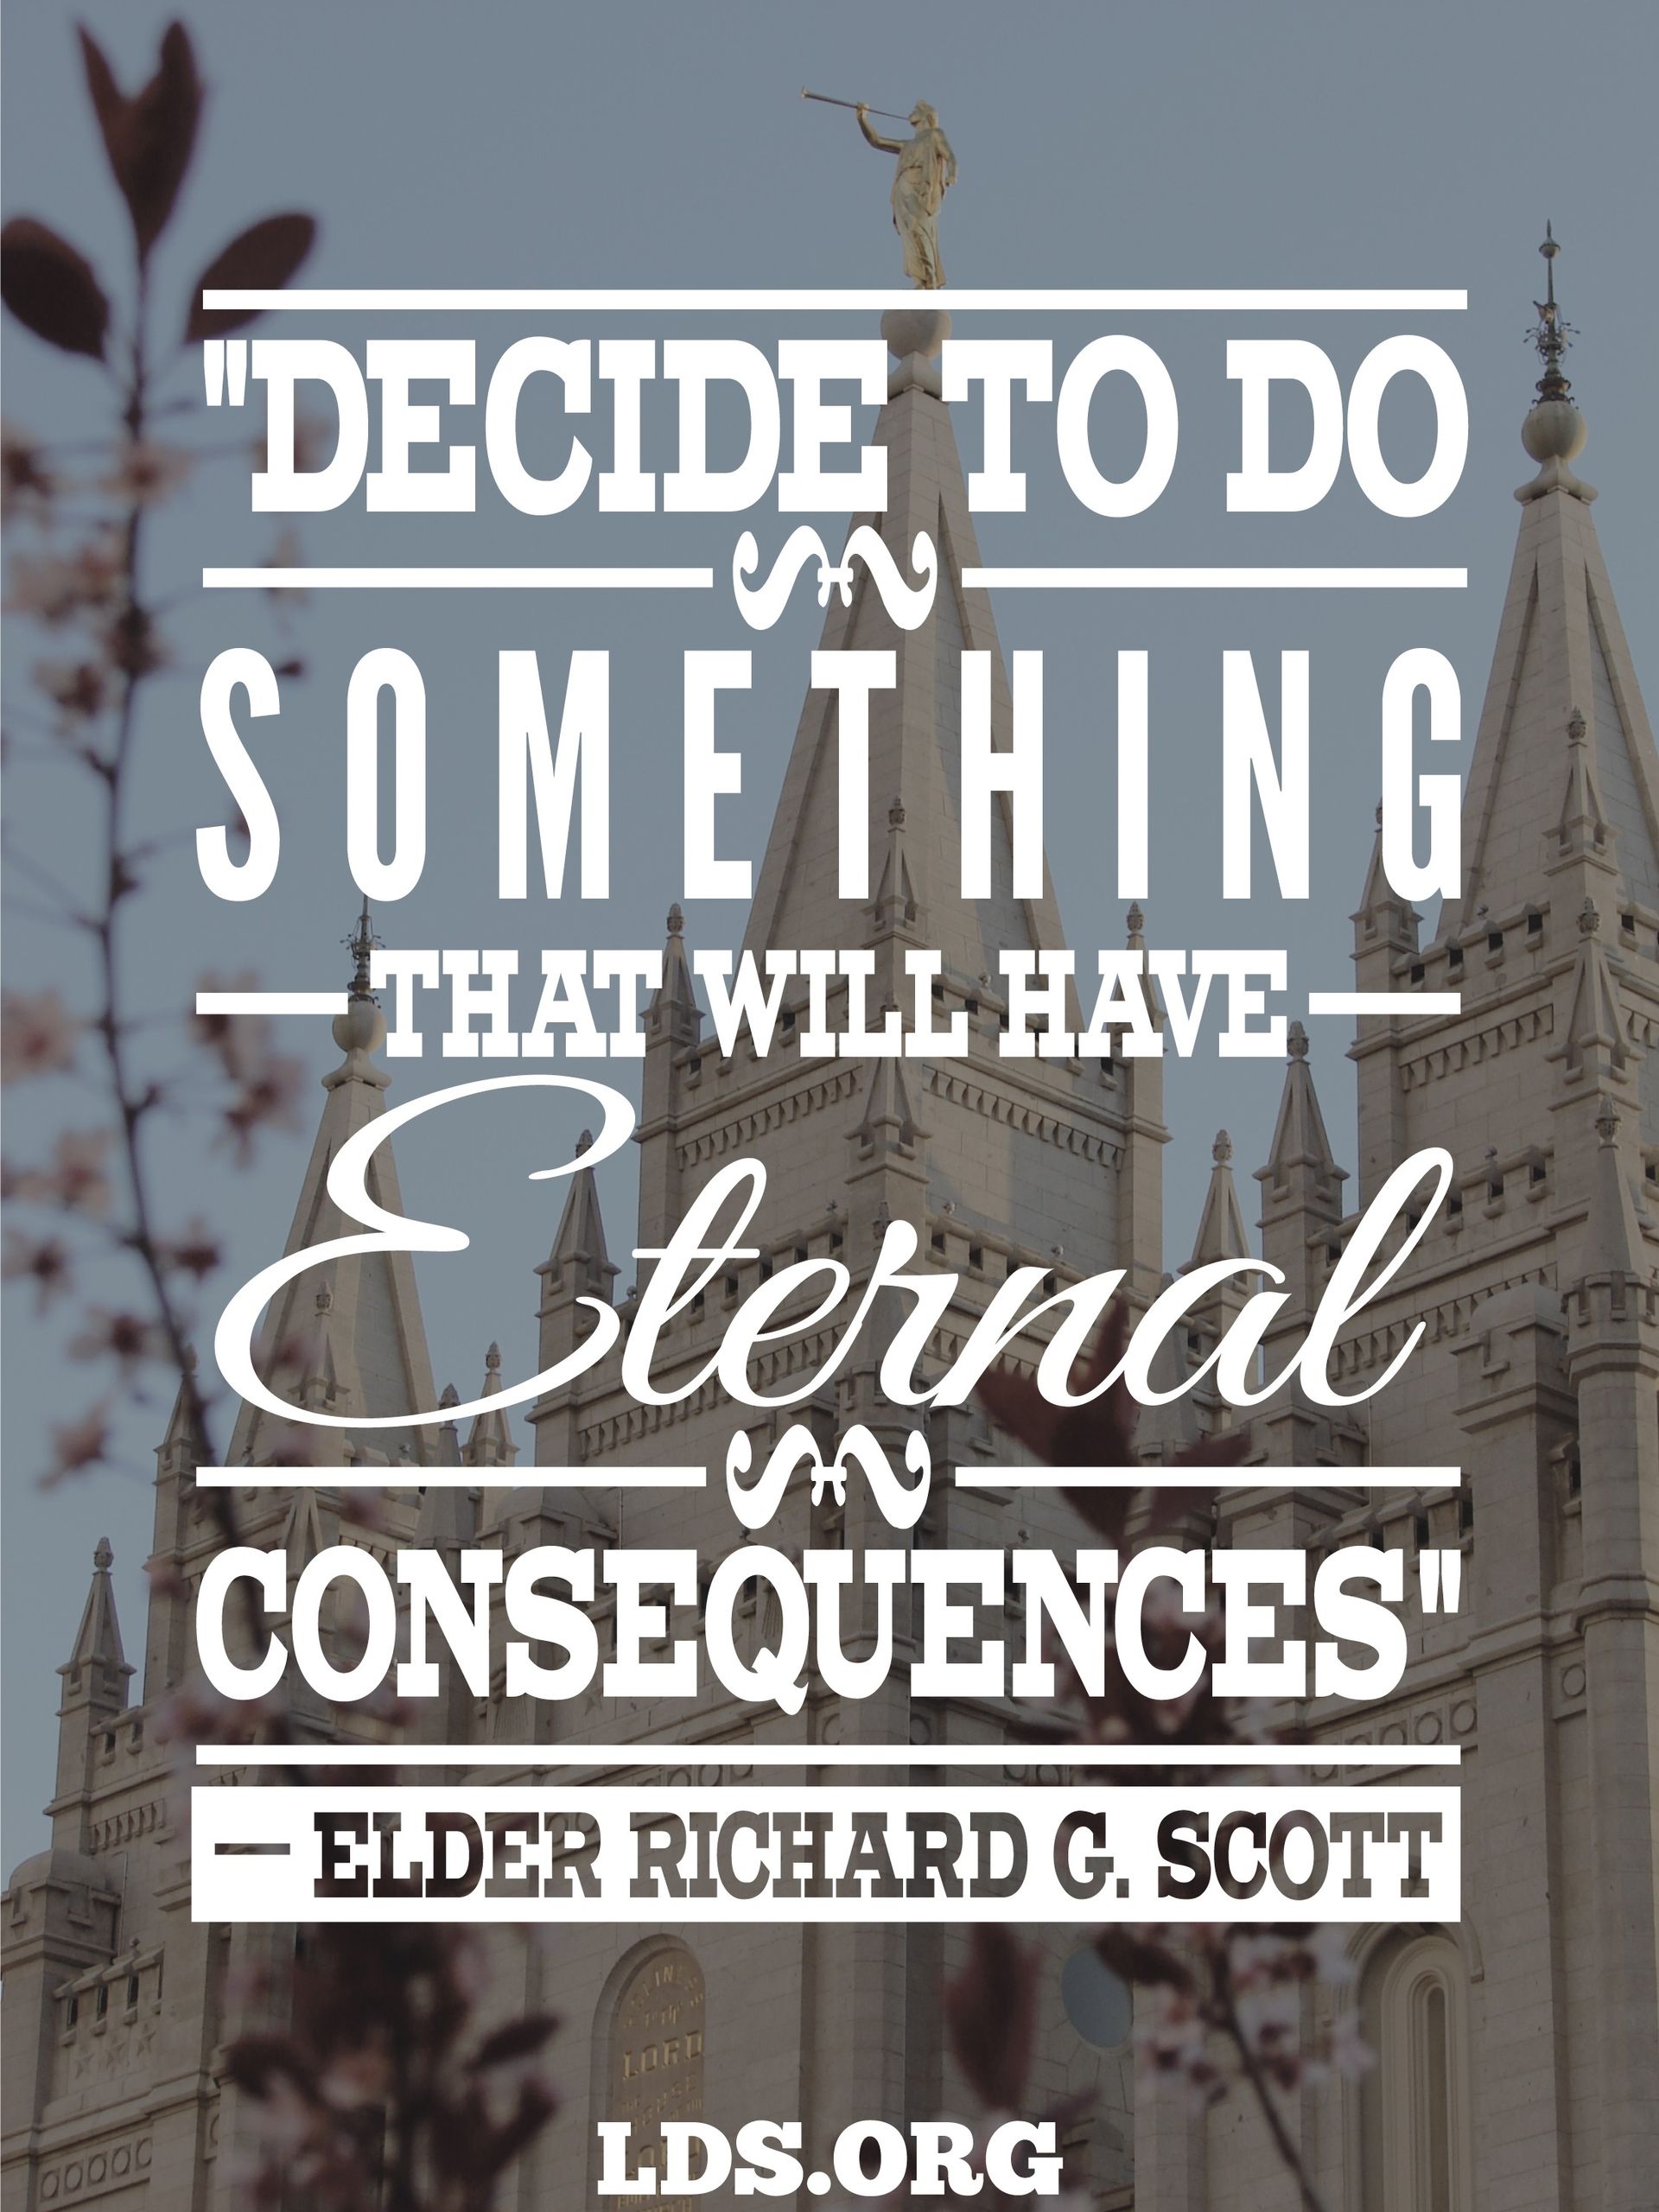 “Decide to do something that will have eternal consequences.”—Elder Richard G. Scott, “The Joy of Redeeming the Dead” © undefined ipCode 1.